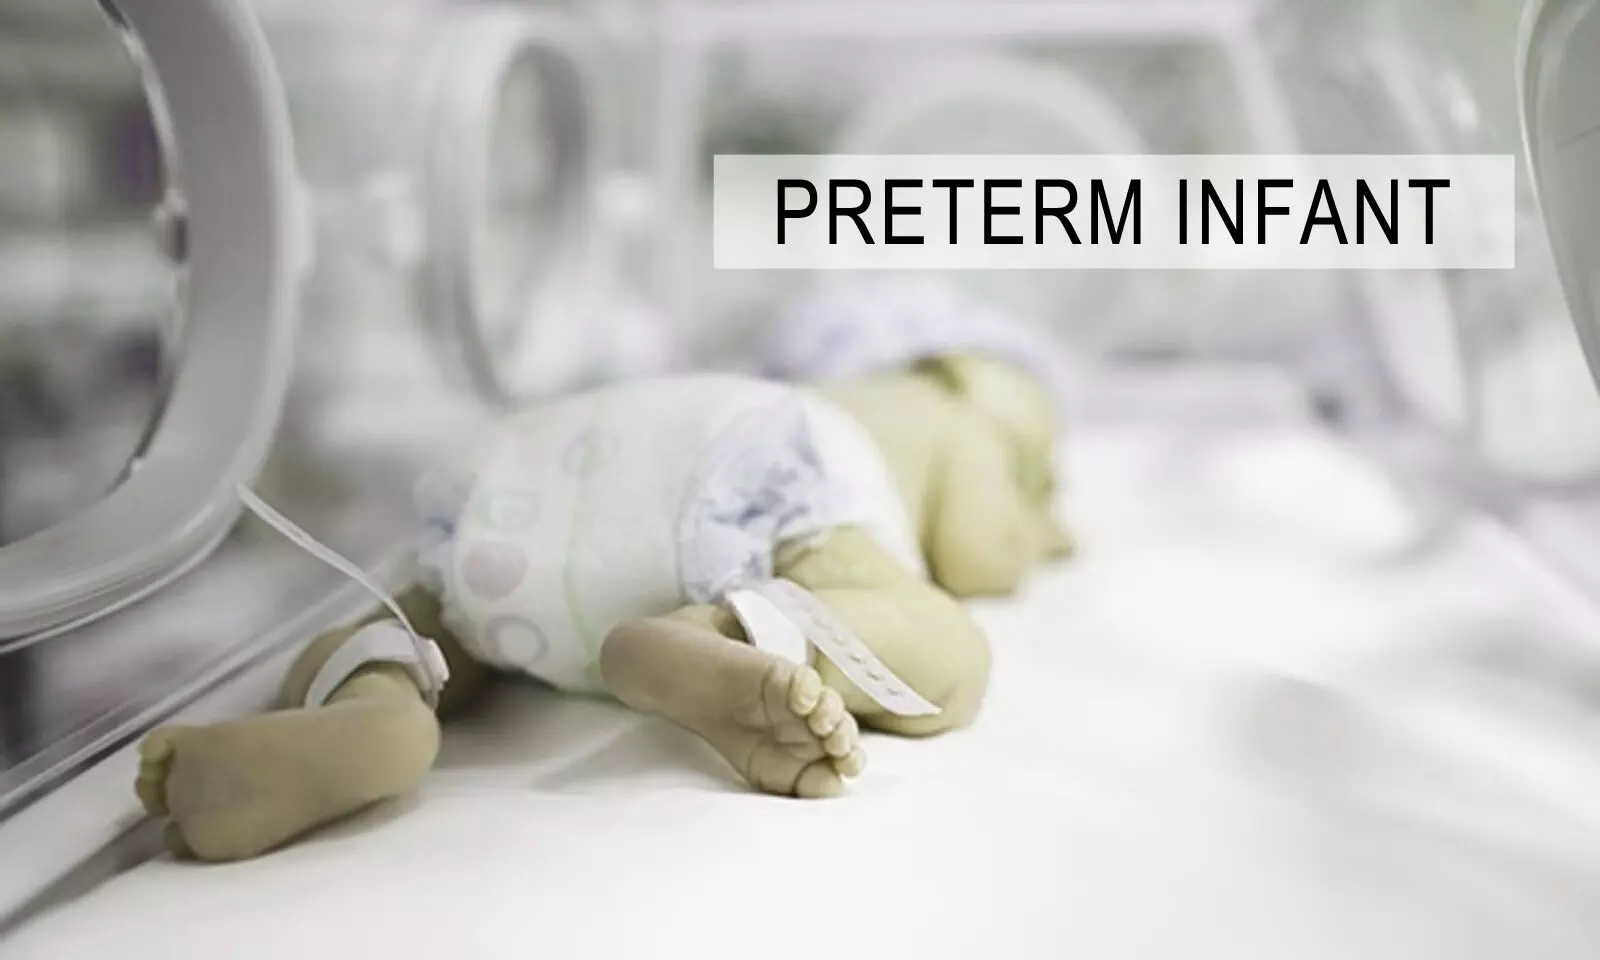 Dobutamine and milrinone equally effective in PLCS in preterm infants: Study